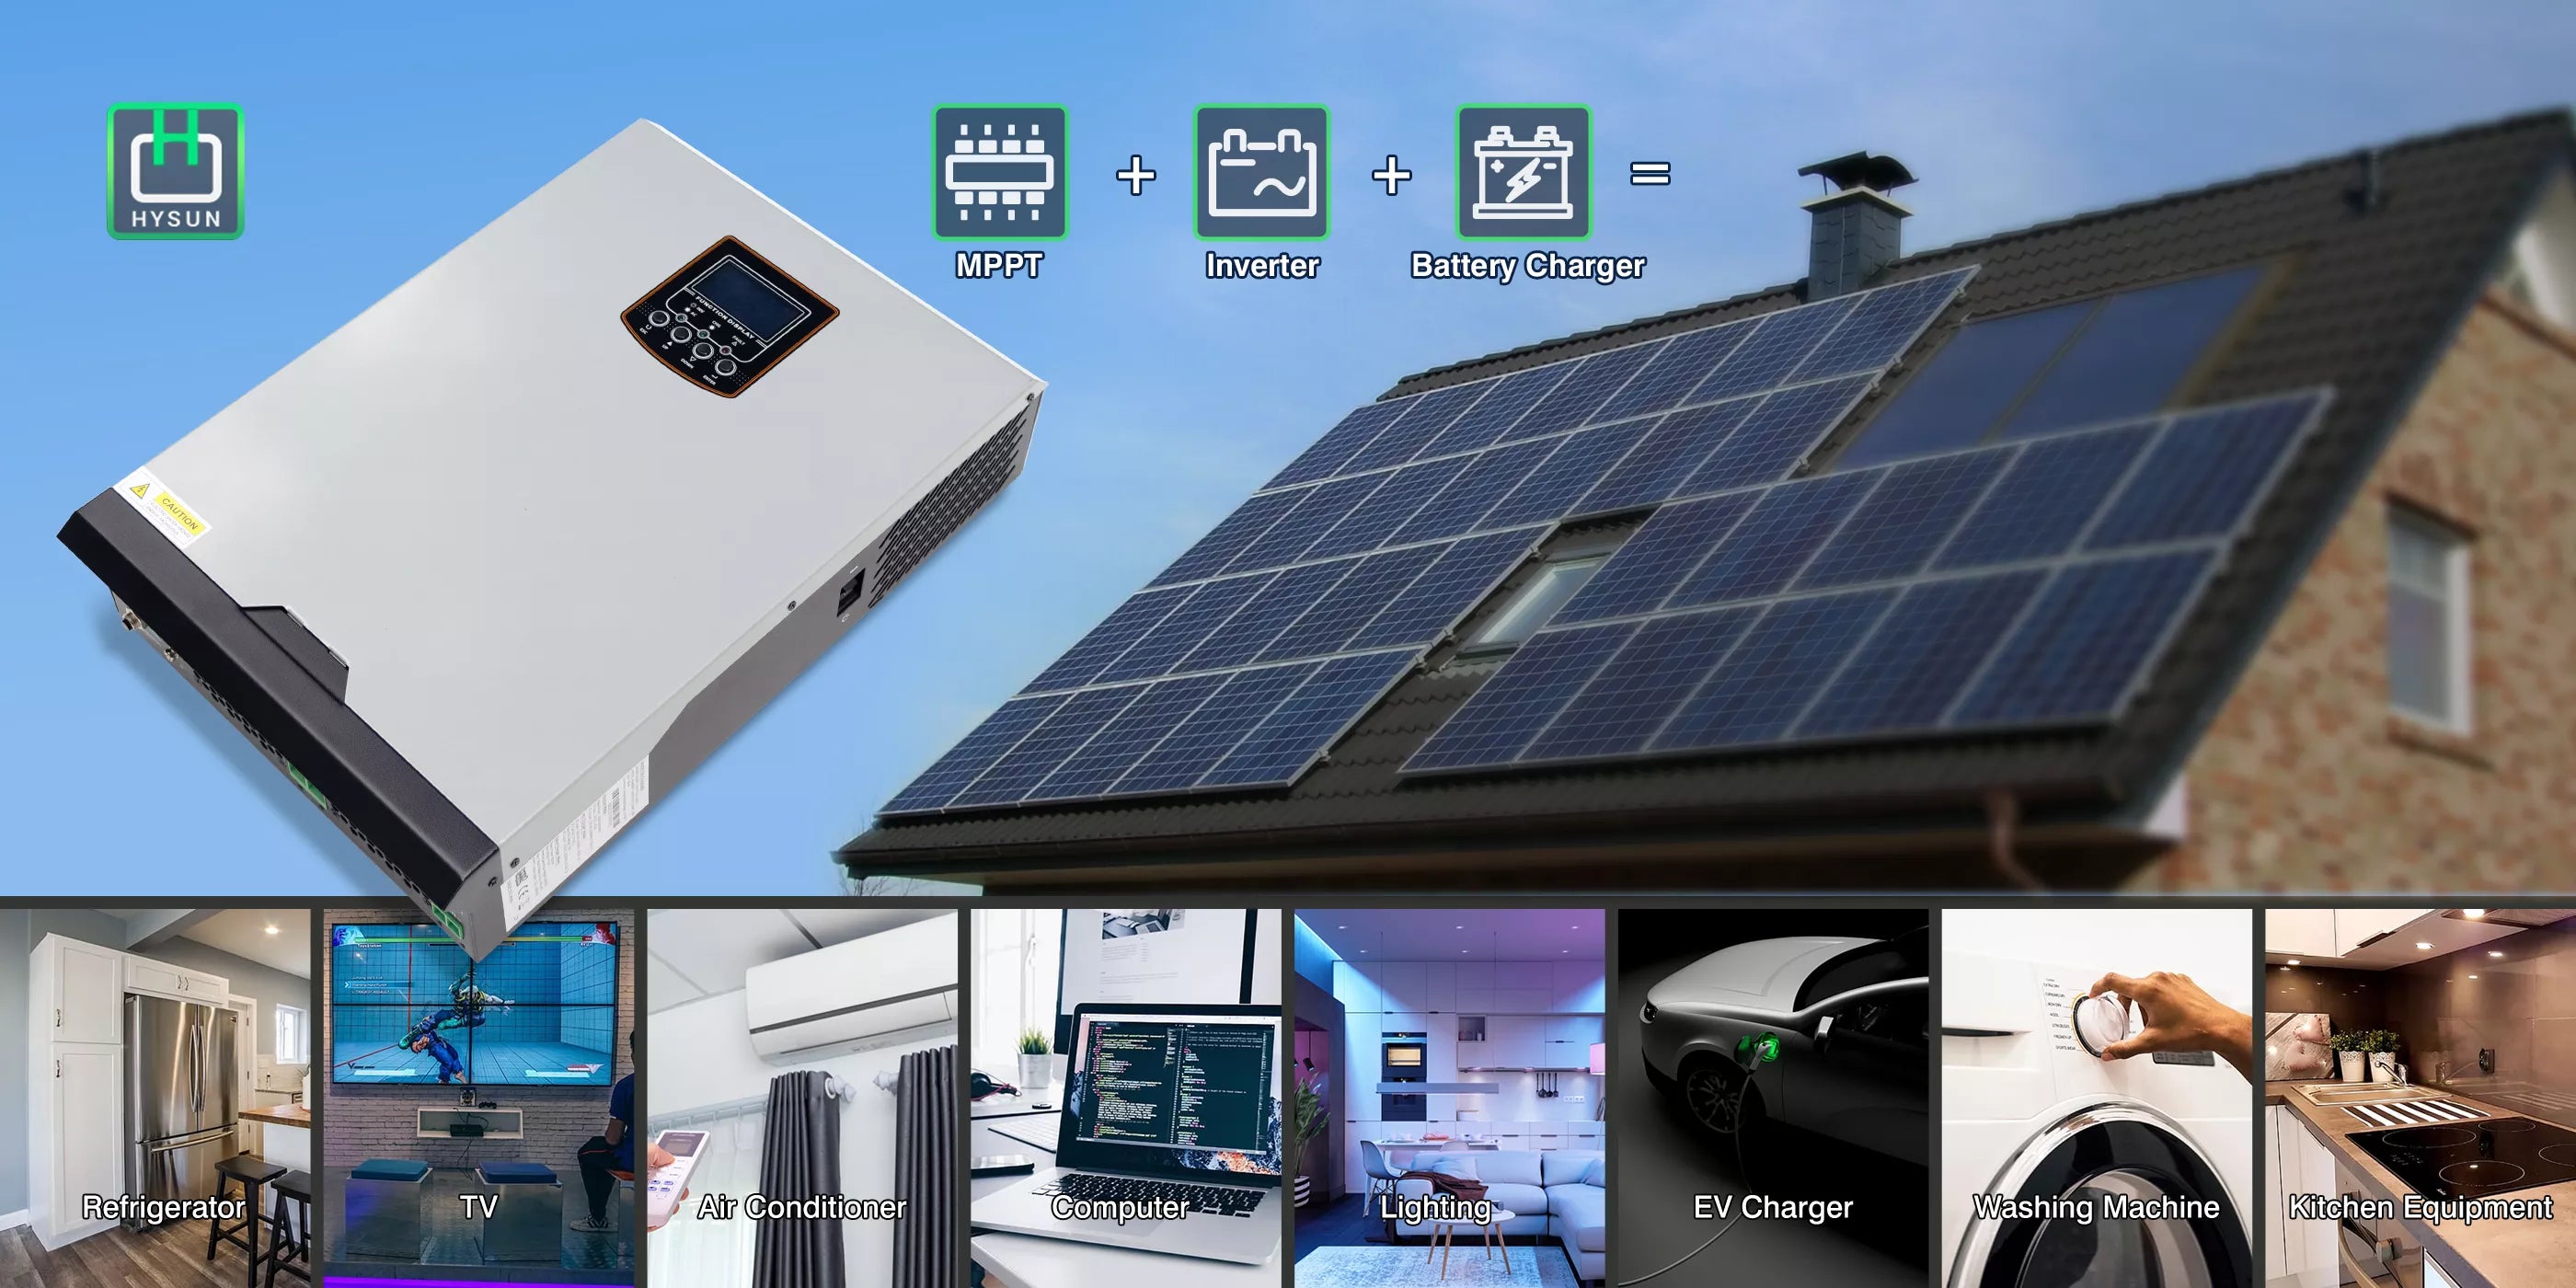 HYSUN multi-function solar inverter is combining functions of inverter, solar charger and battery charger to offer uninterruptible power support